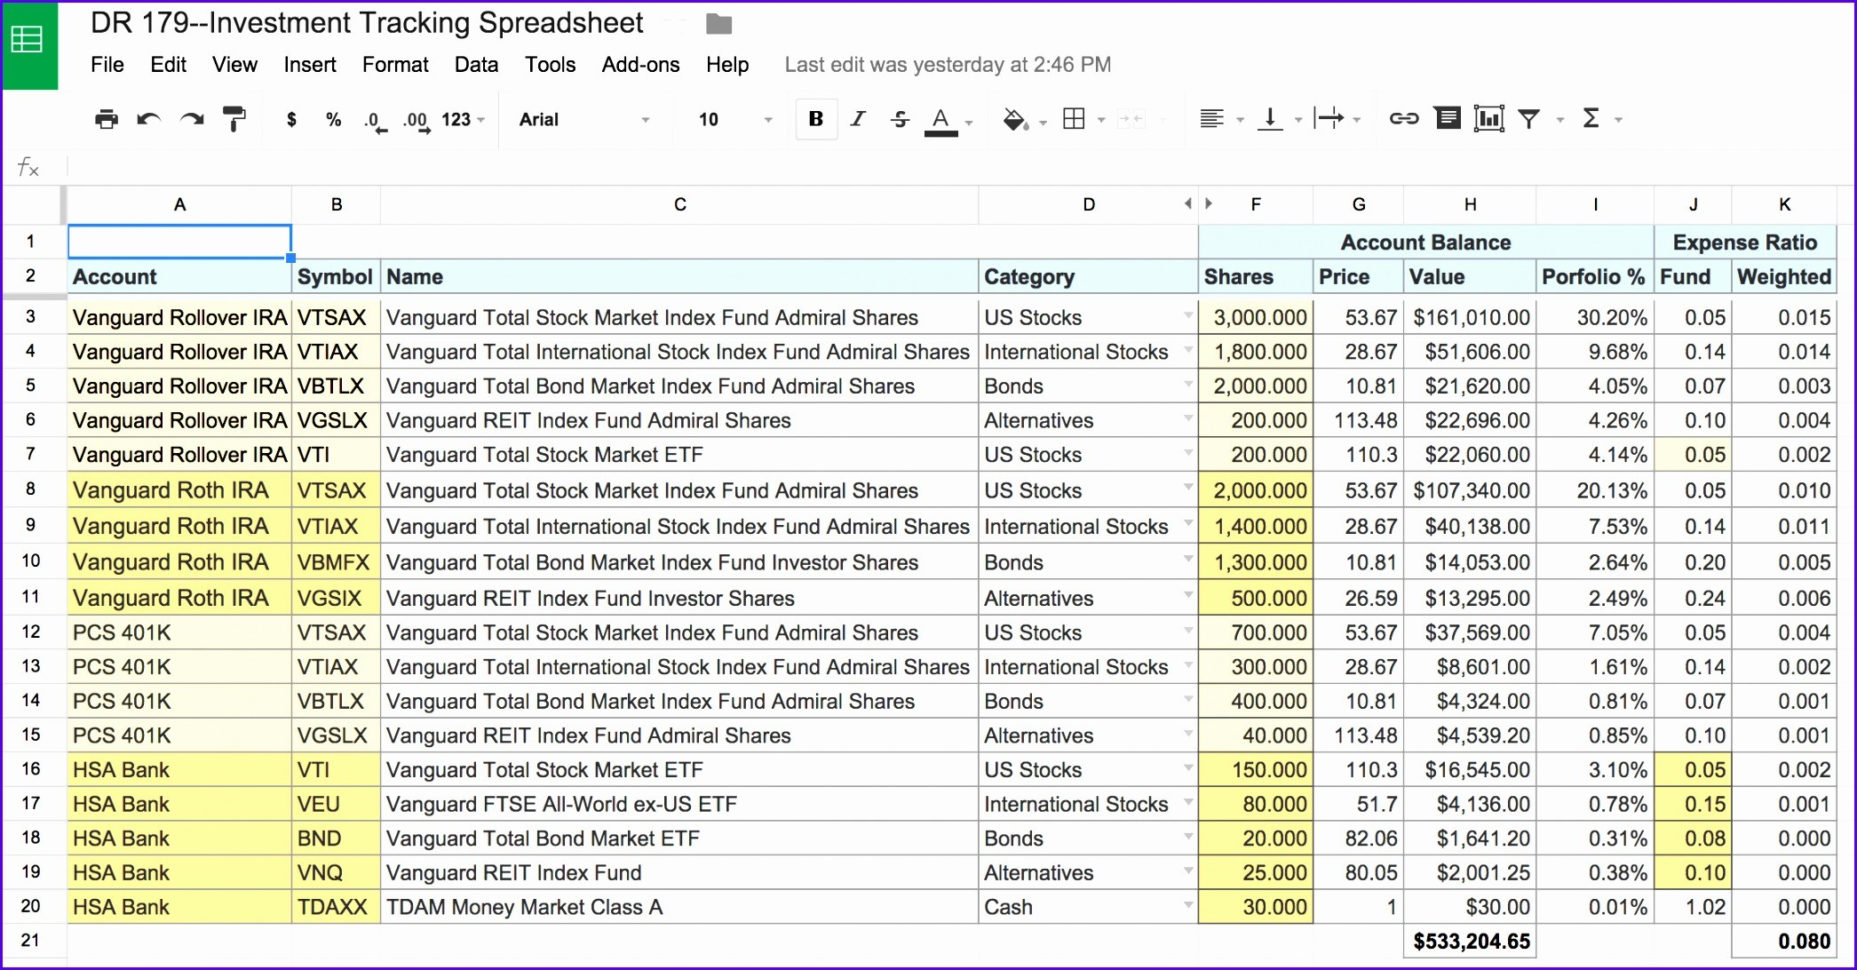 customer-tracking-spreadsheet-excel-with-regard-to-customer-management